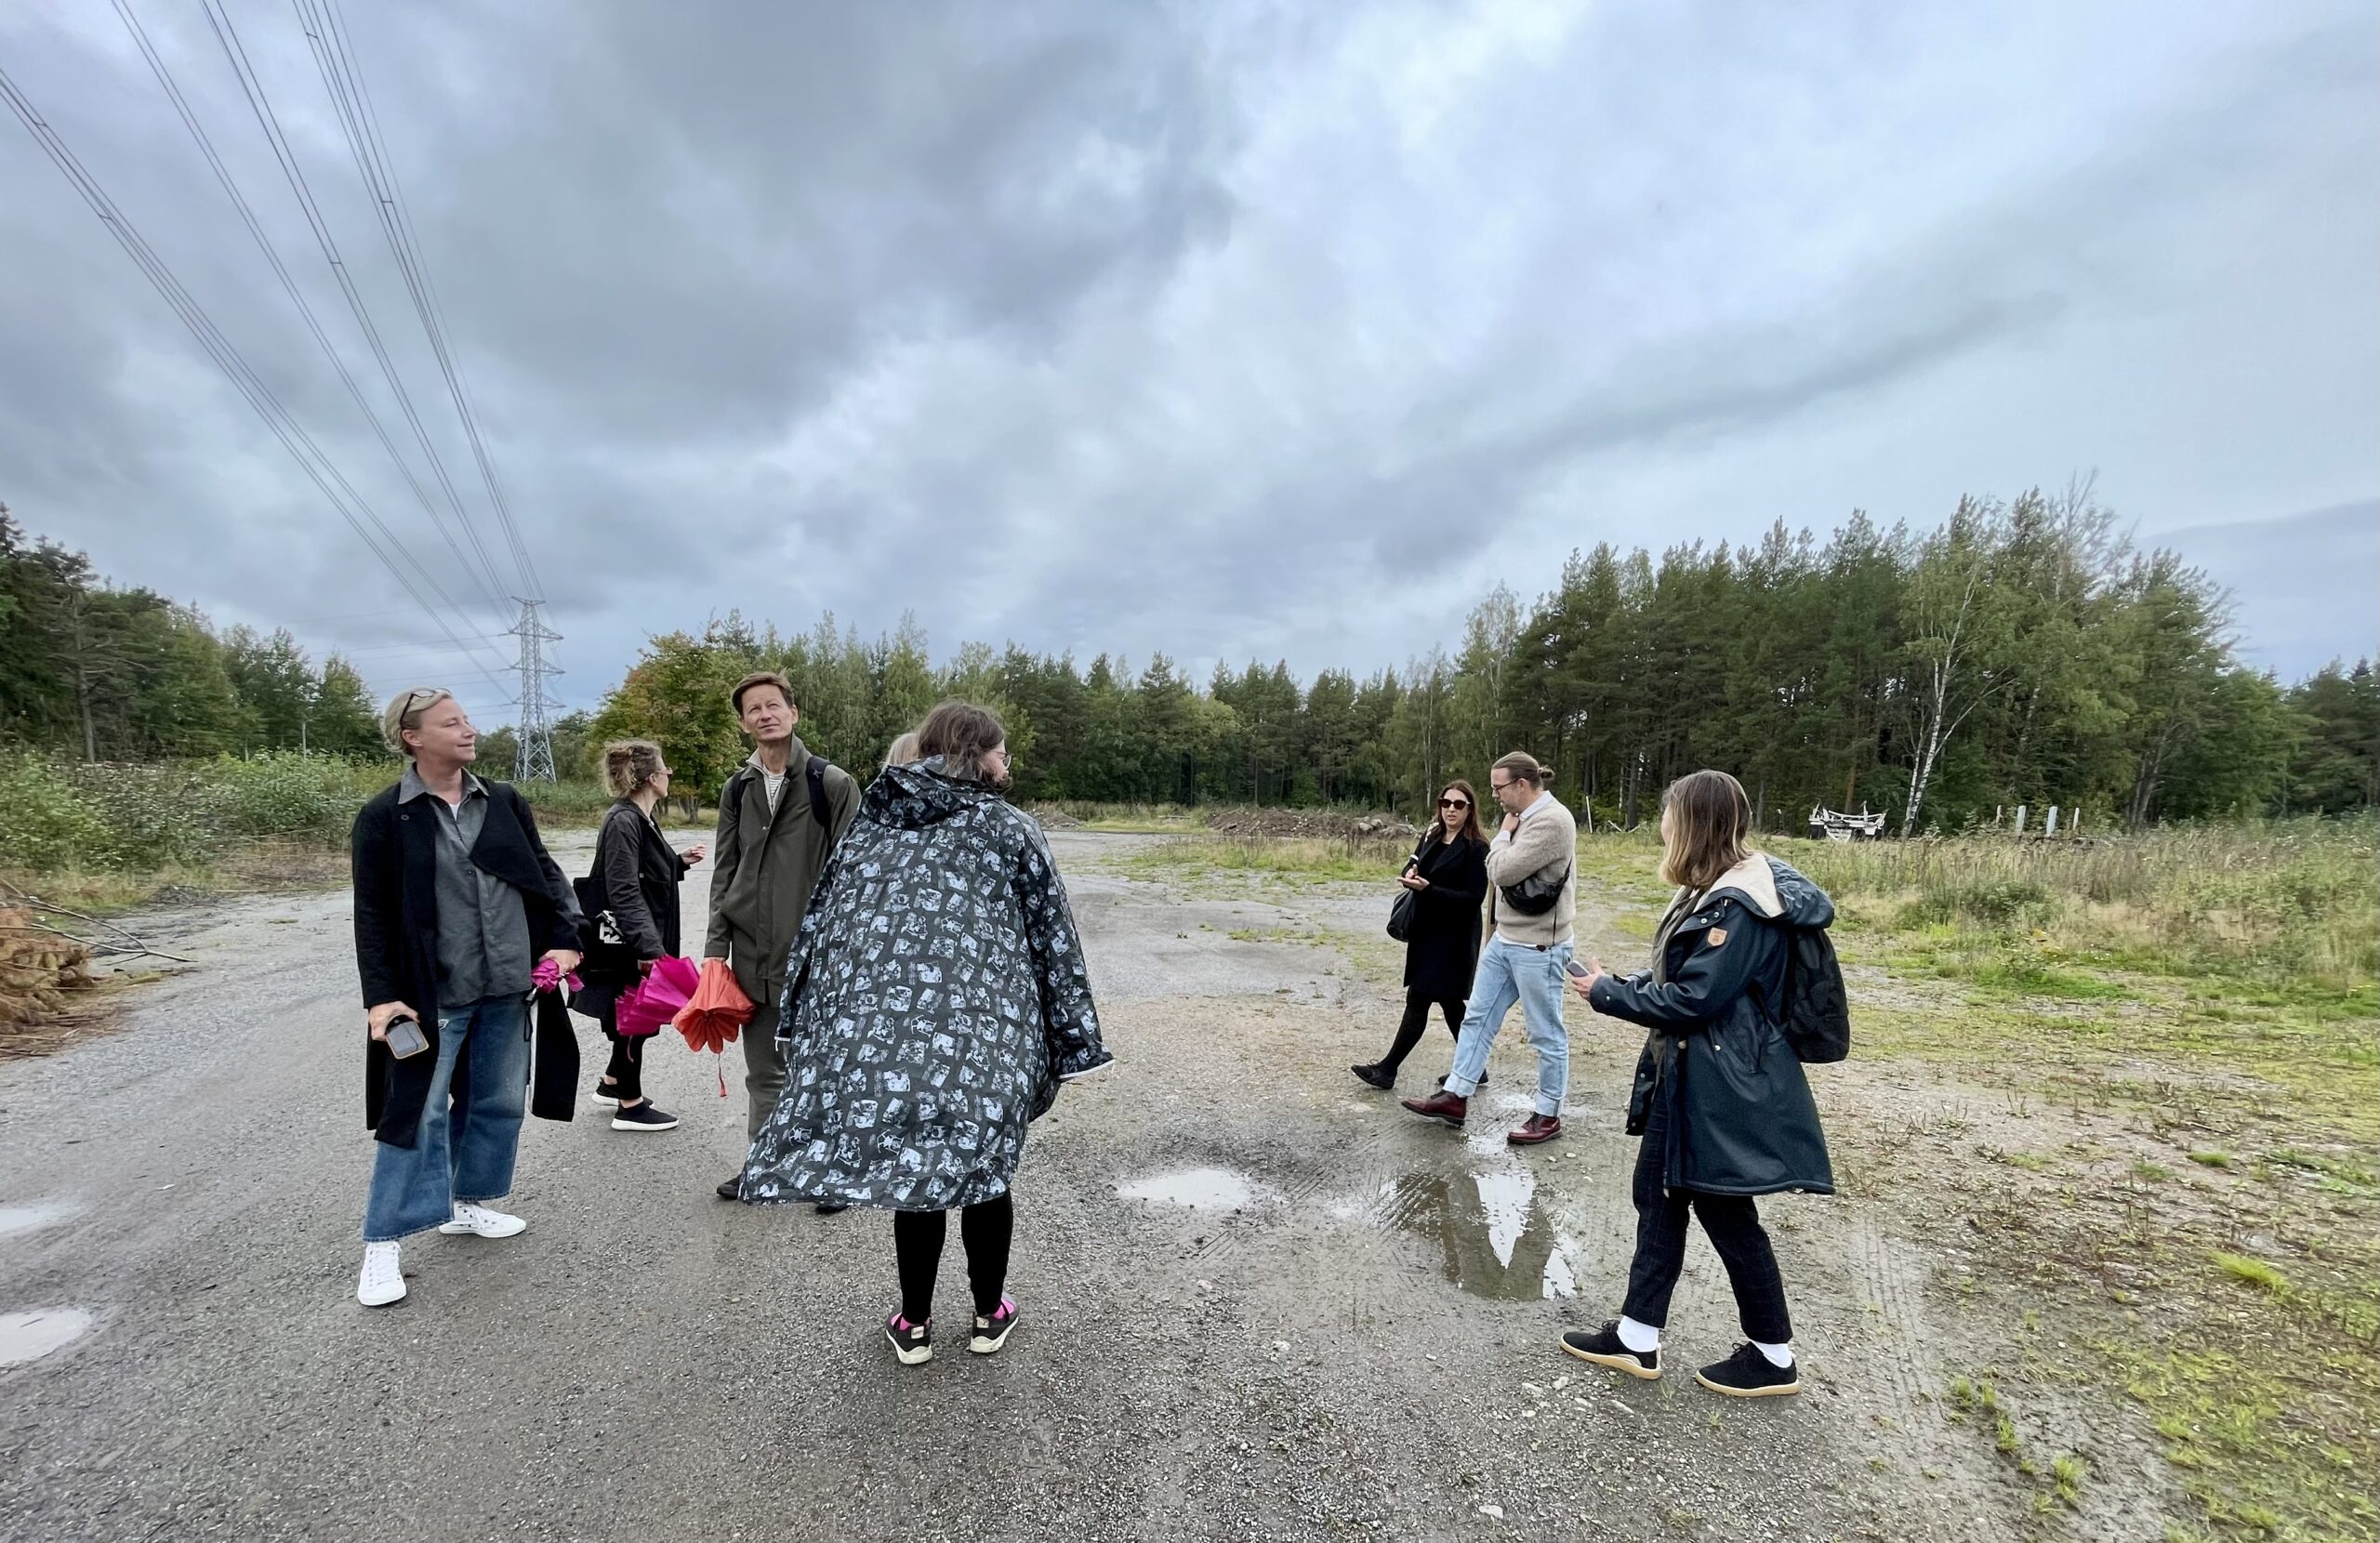 The Europan 17 Finland jury visiting the competition site on the Eastern Island in Helsinki